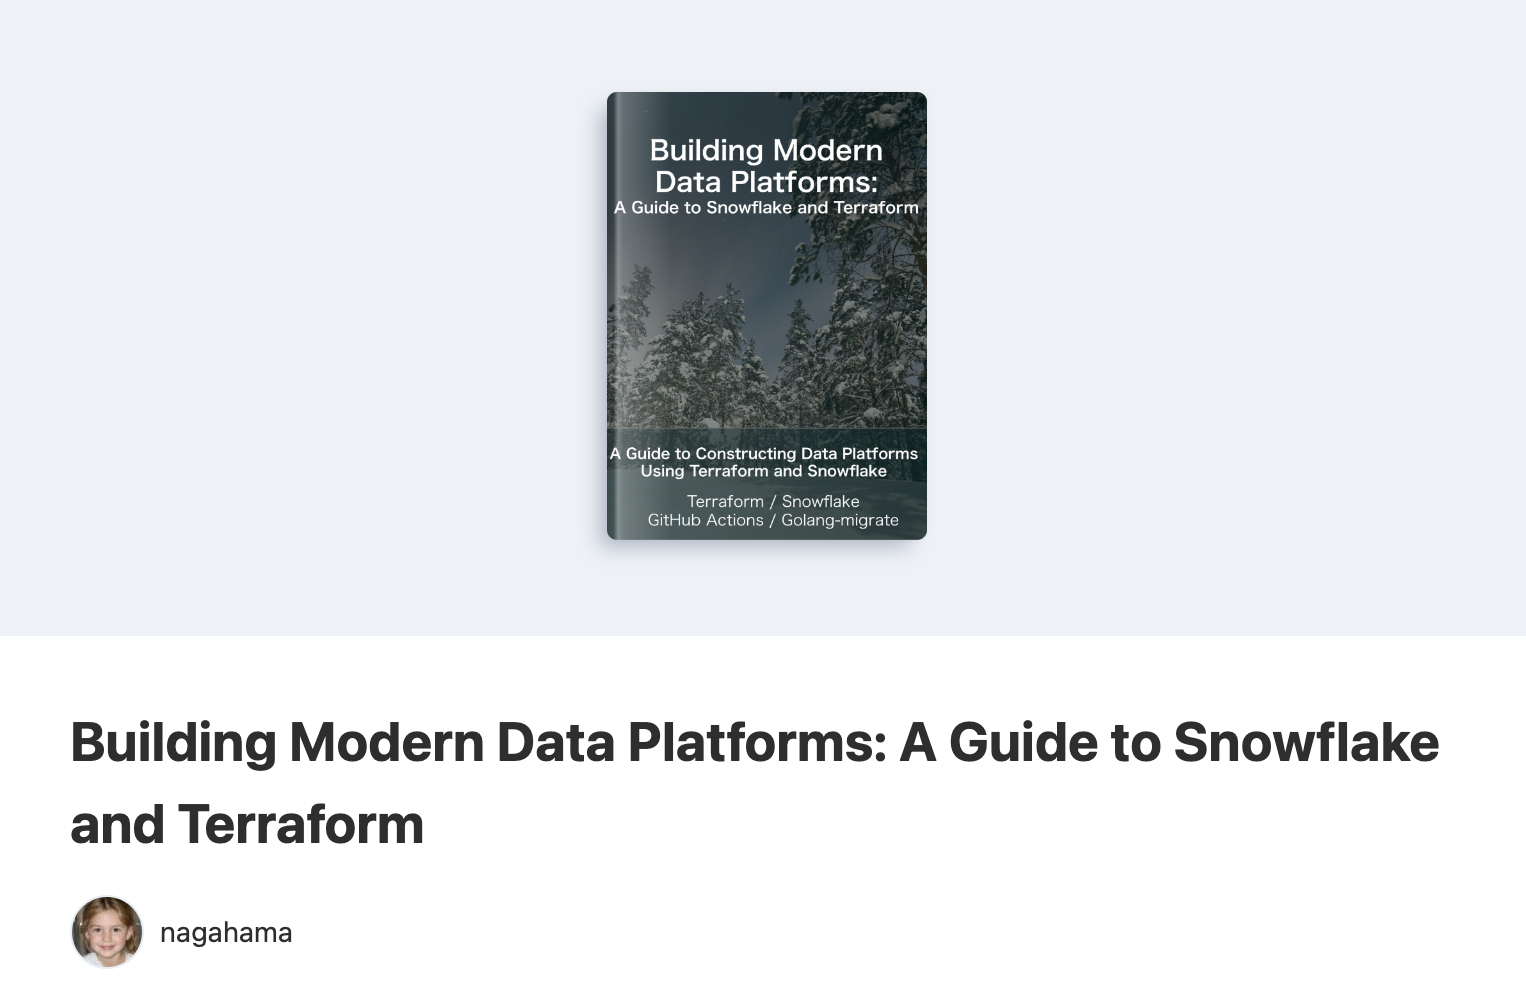 Building Modern Data Platforms: A Guide to Snowflake and Terraform